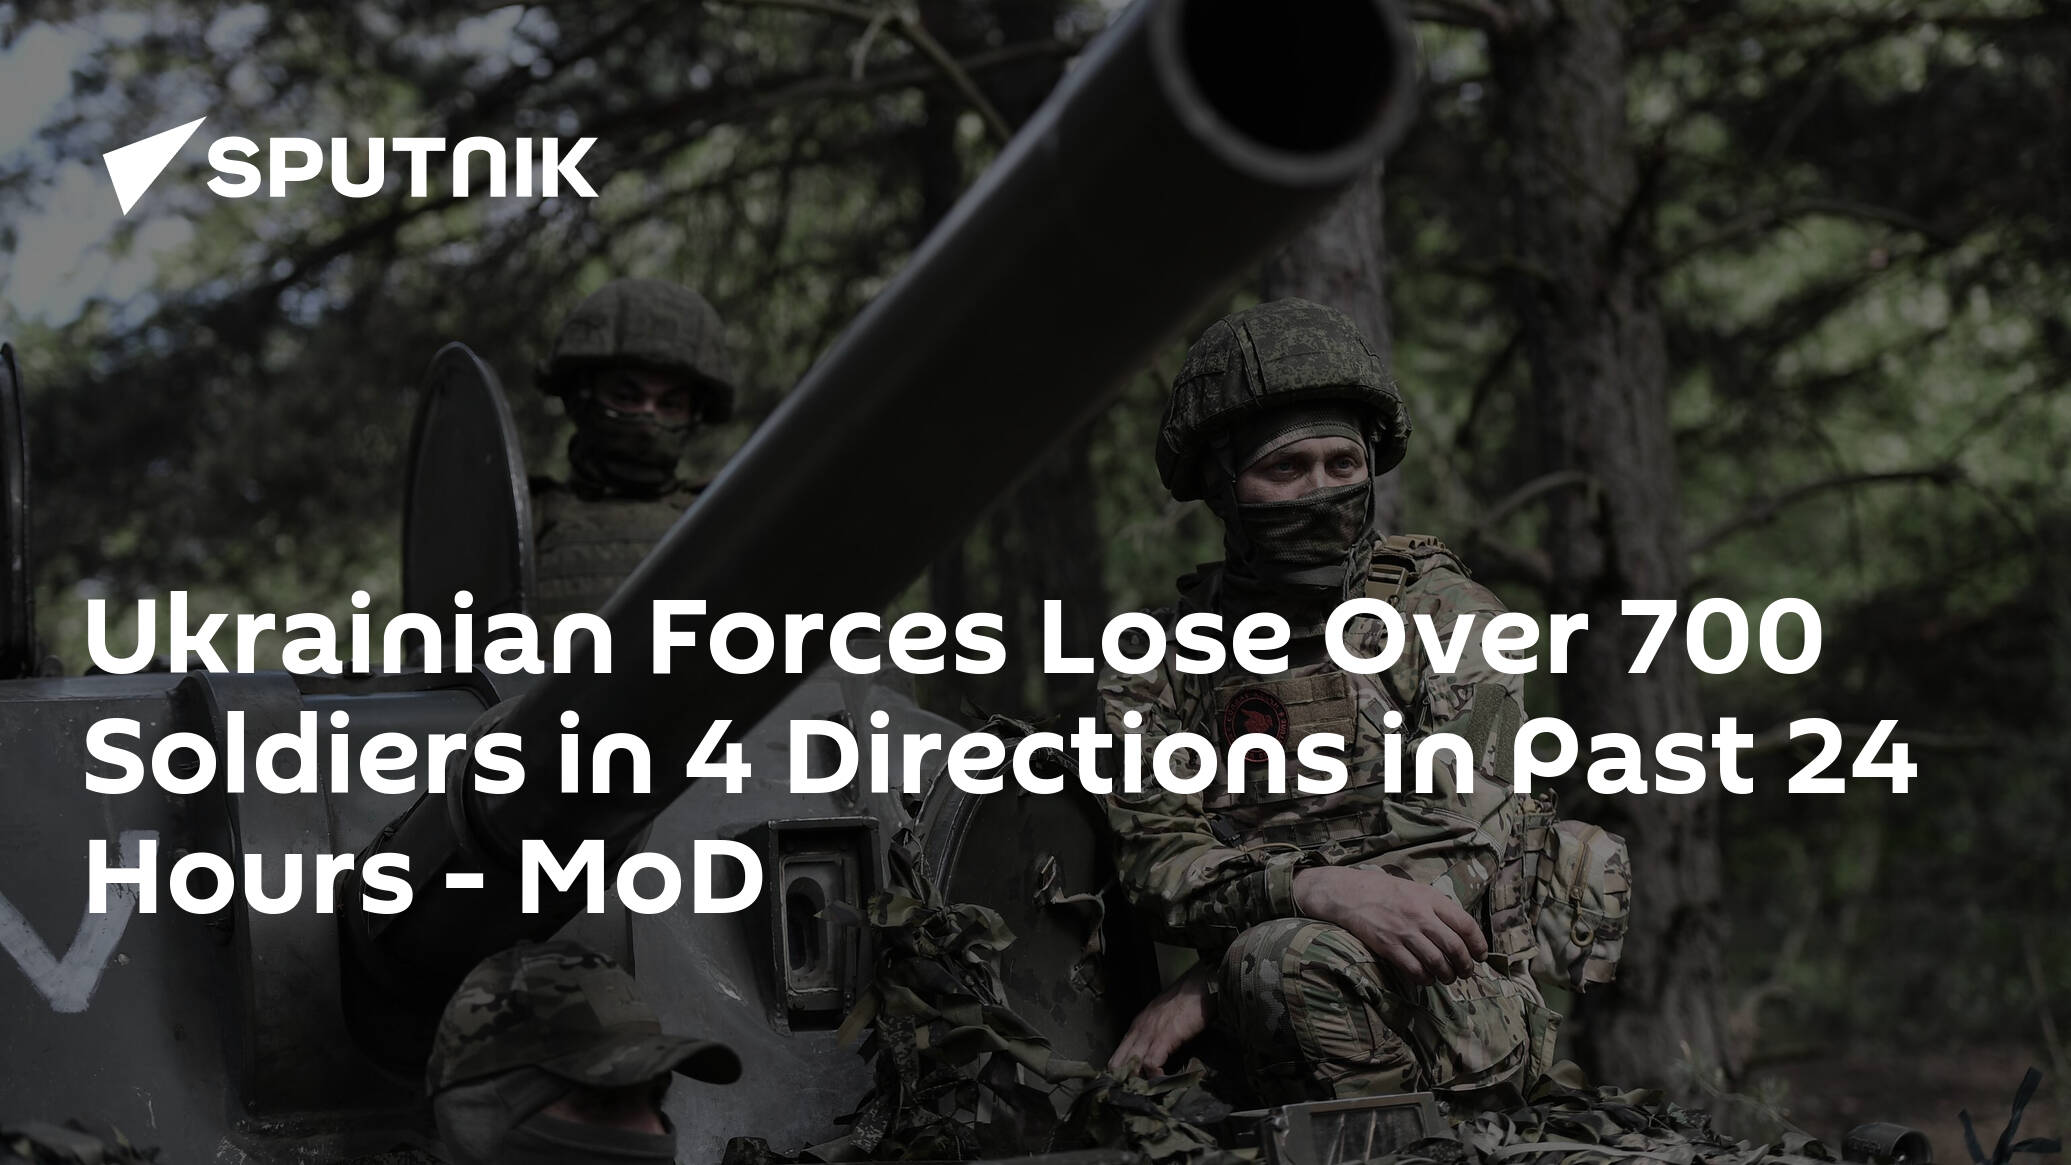 Ukrainian Forces Loses Over 700 Soldiers in 4 Directions in Past 24 Hours – MoD